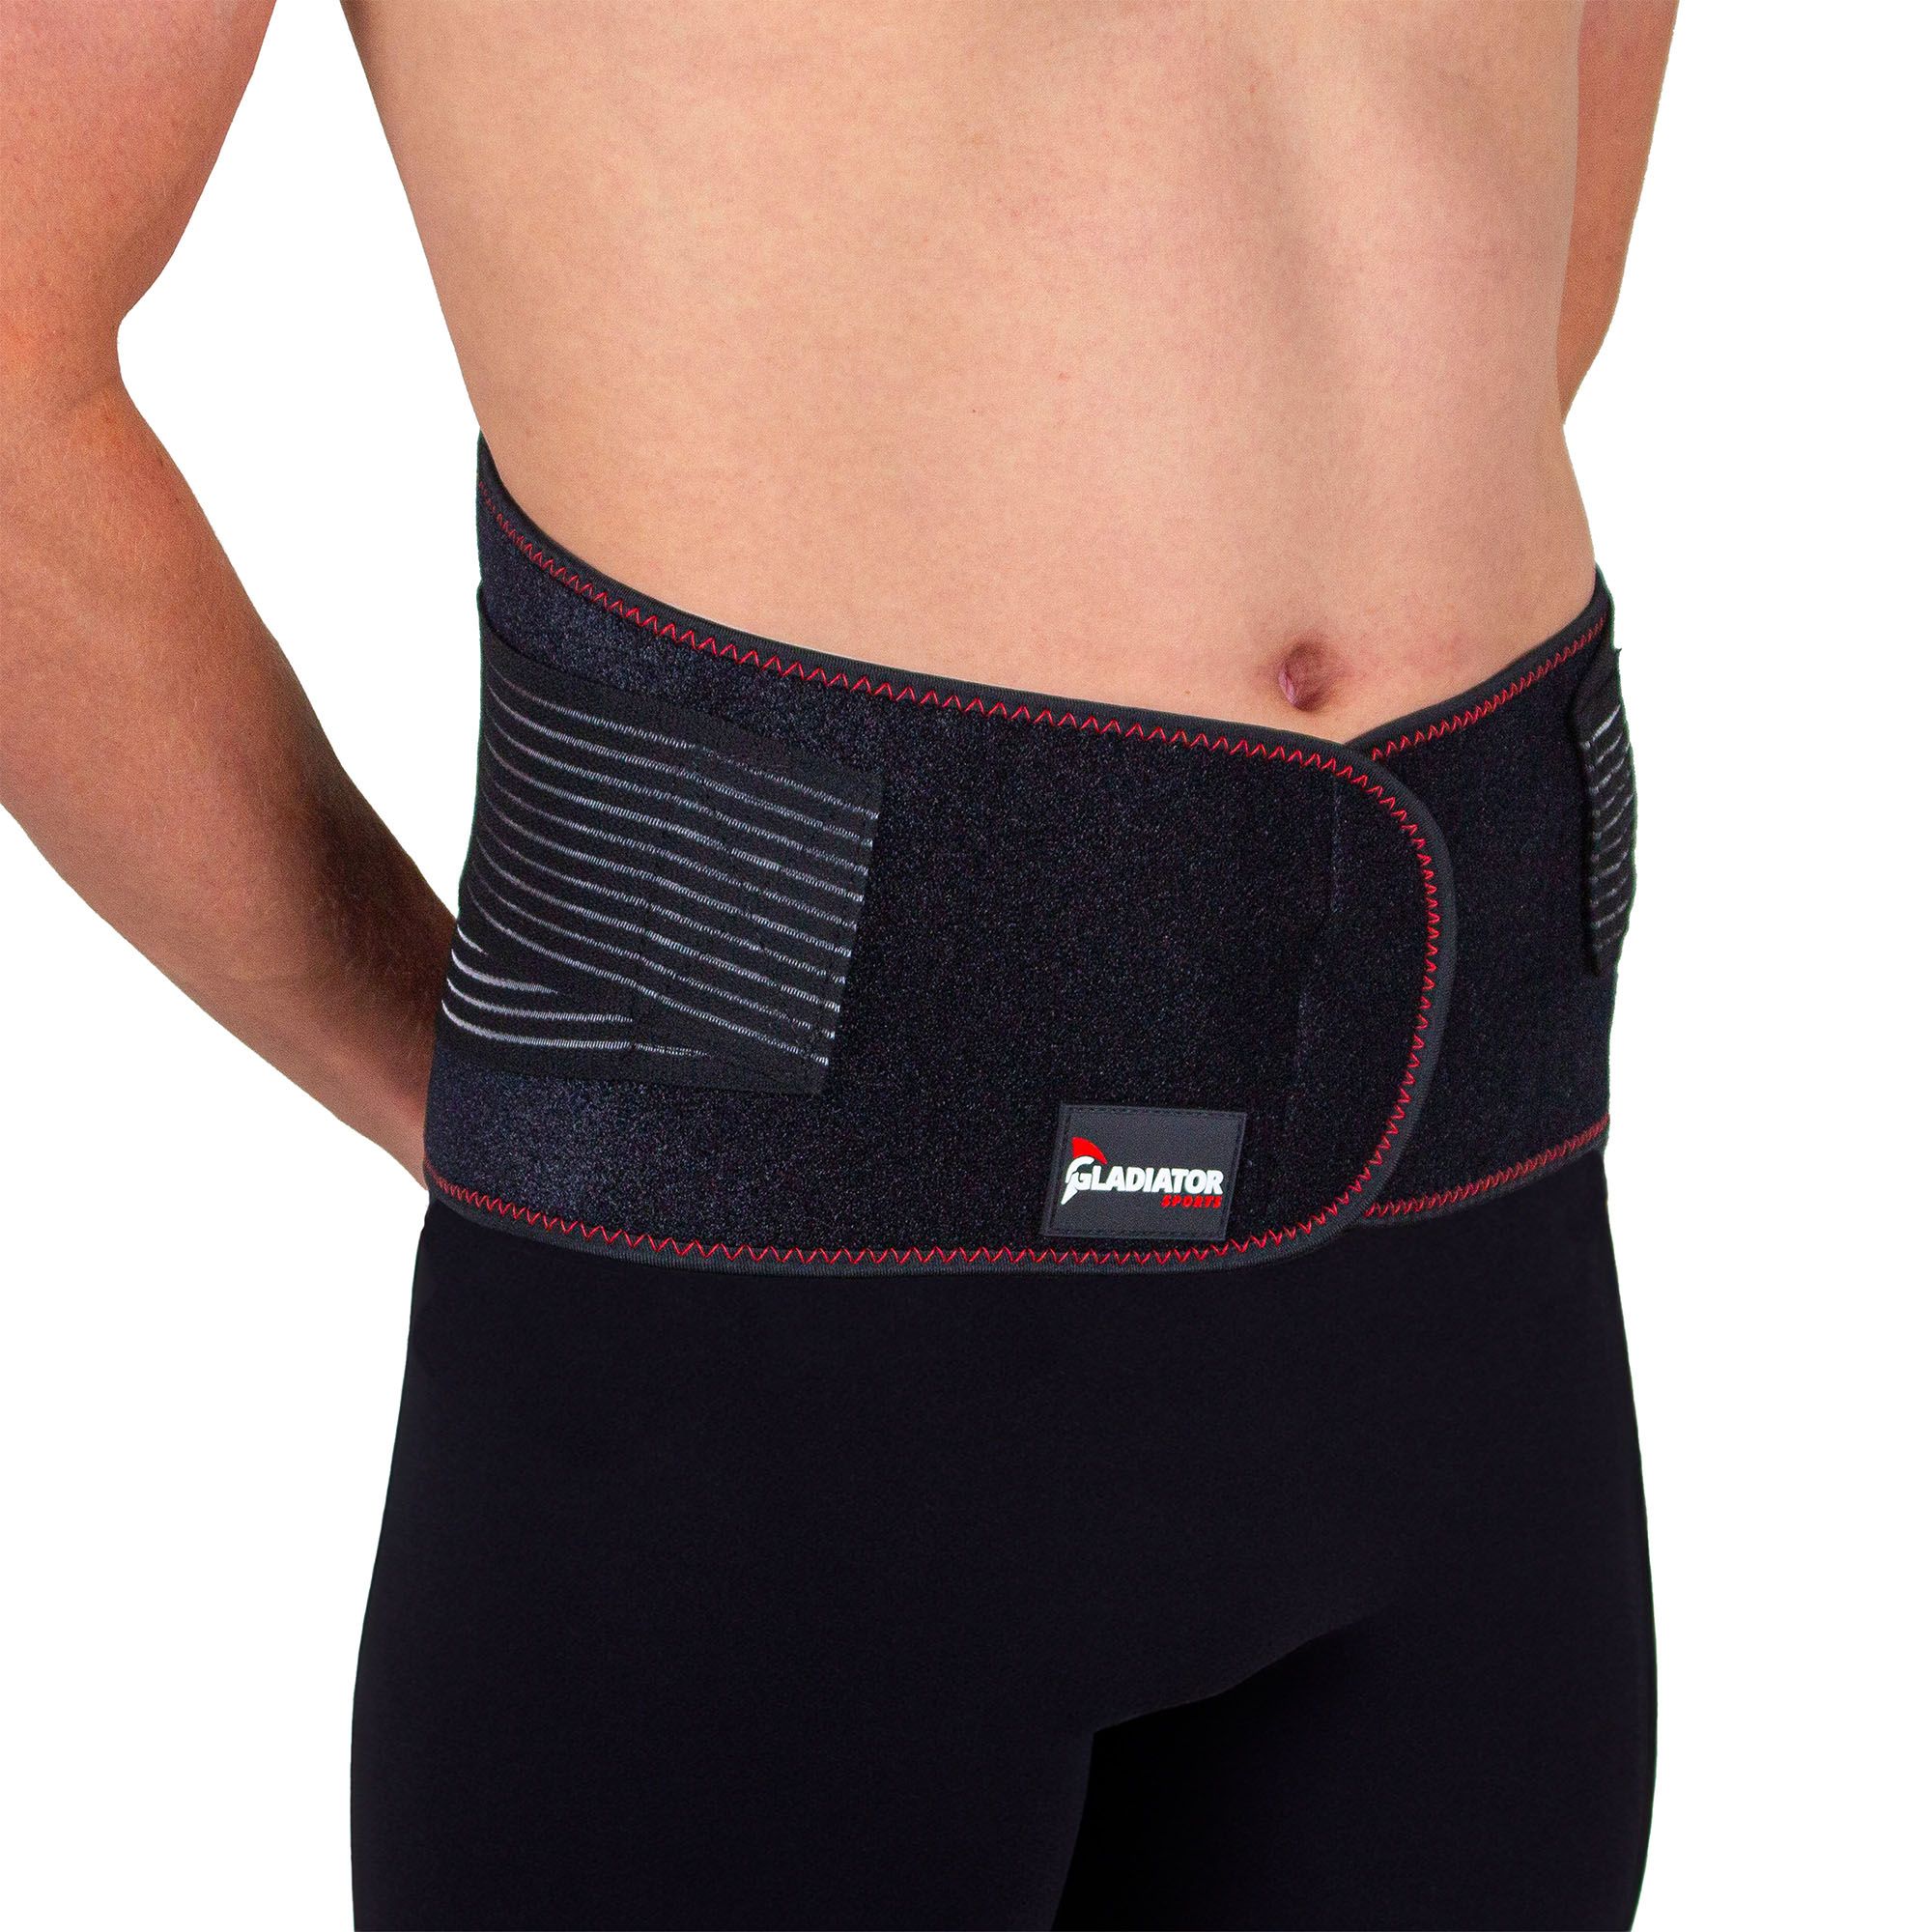 gladiator sports back support with busks worn by model front view